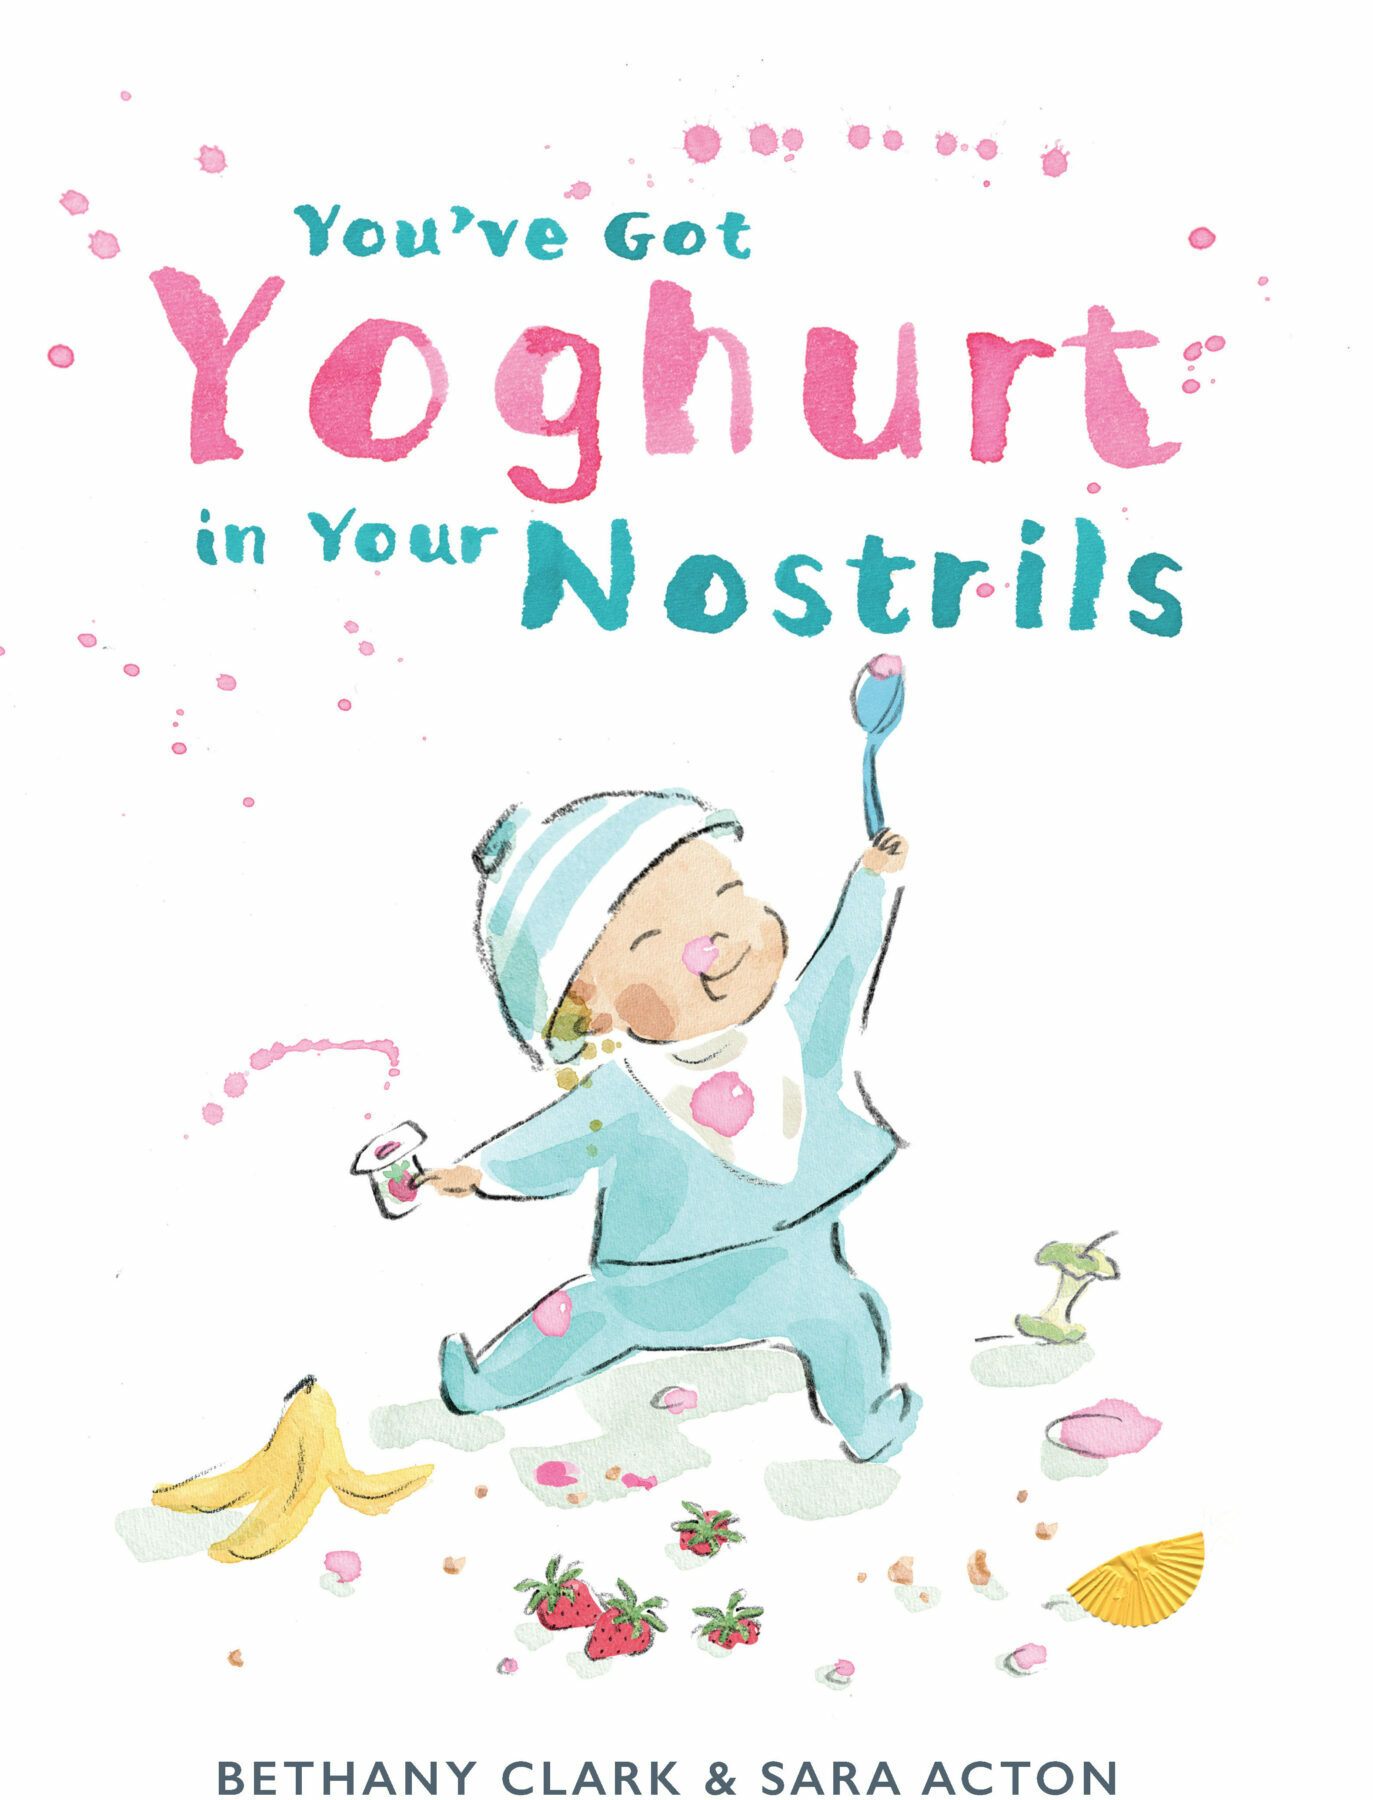 A children's book cover featuring an illustration of a toddler with a bowl on their head, holding a spoon in the air and smiling, surrounded by bits of food